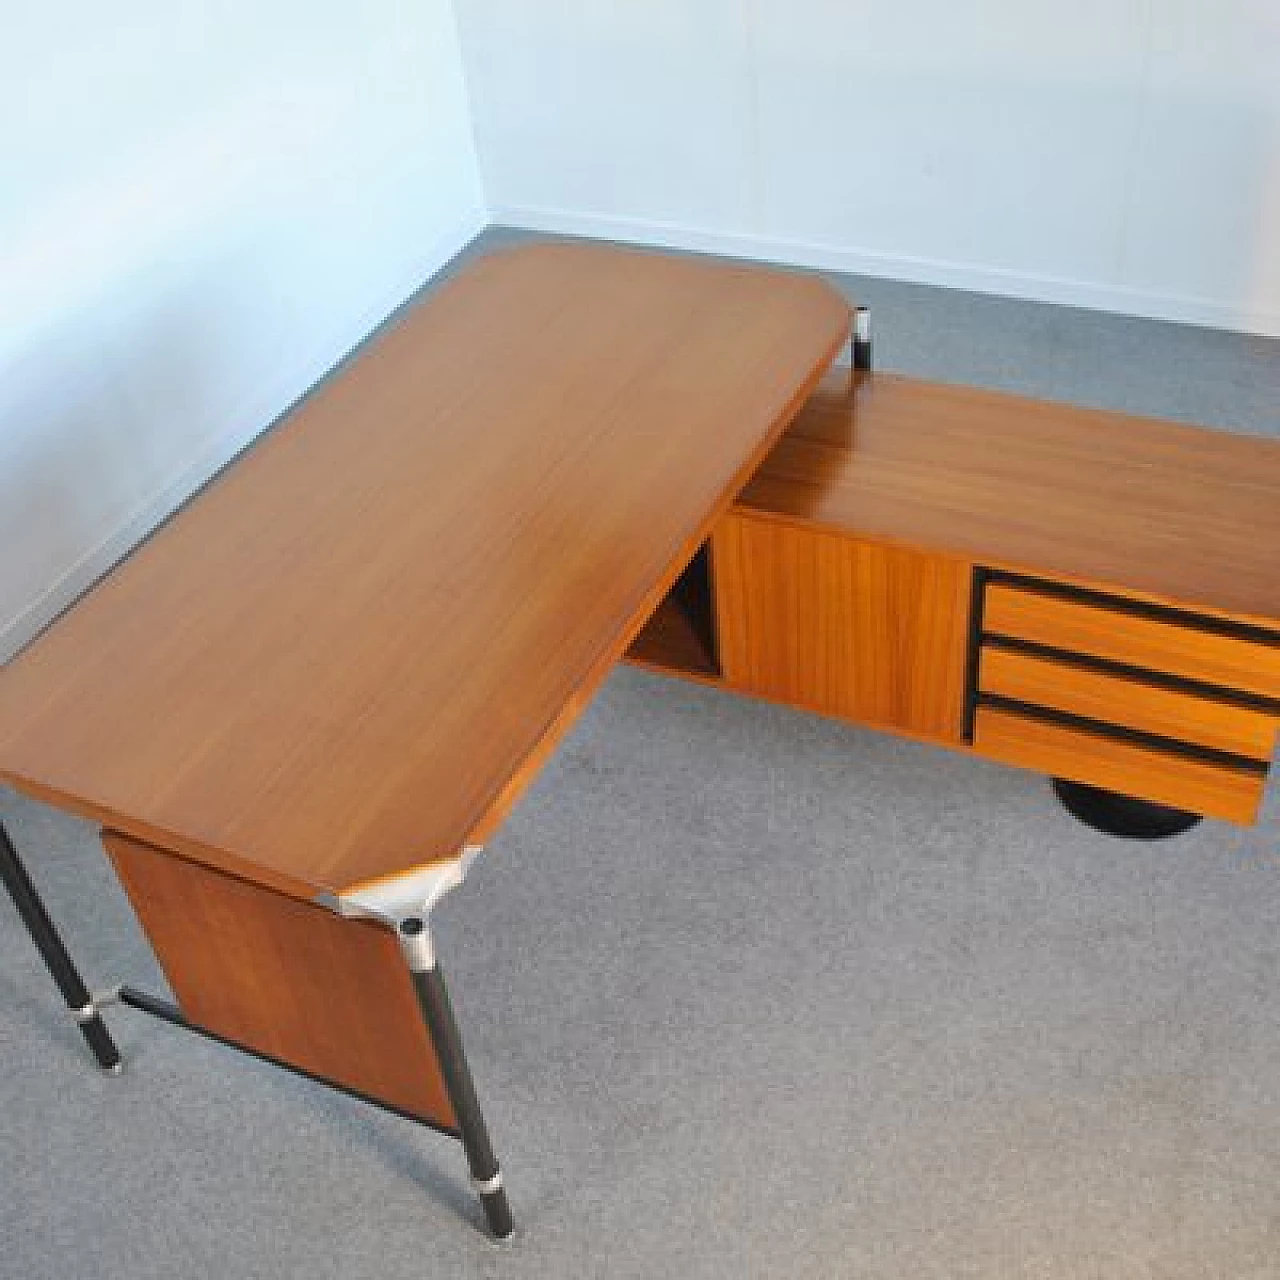 Executive desk by Ico Parisi for MIM Rome, 1950s 1412244